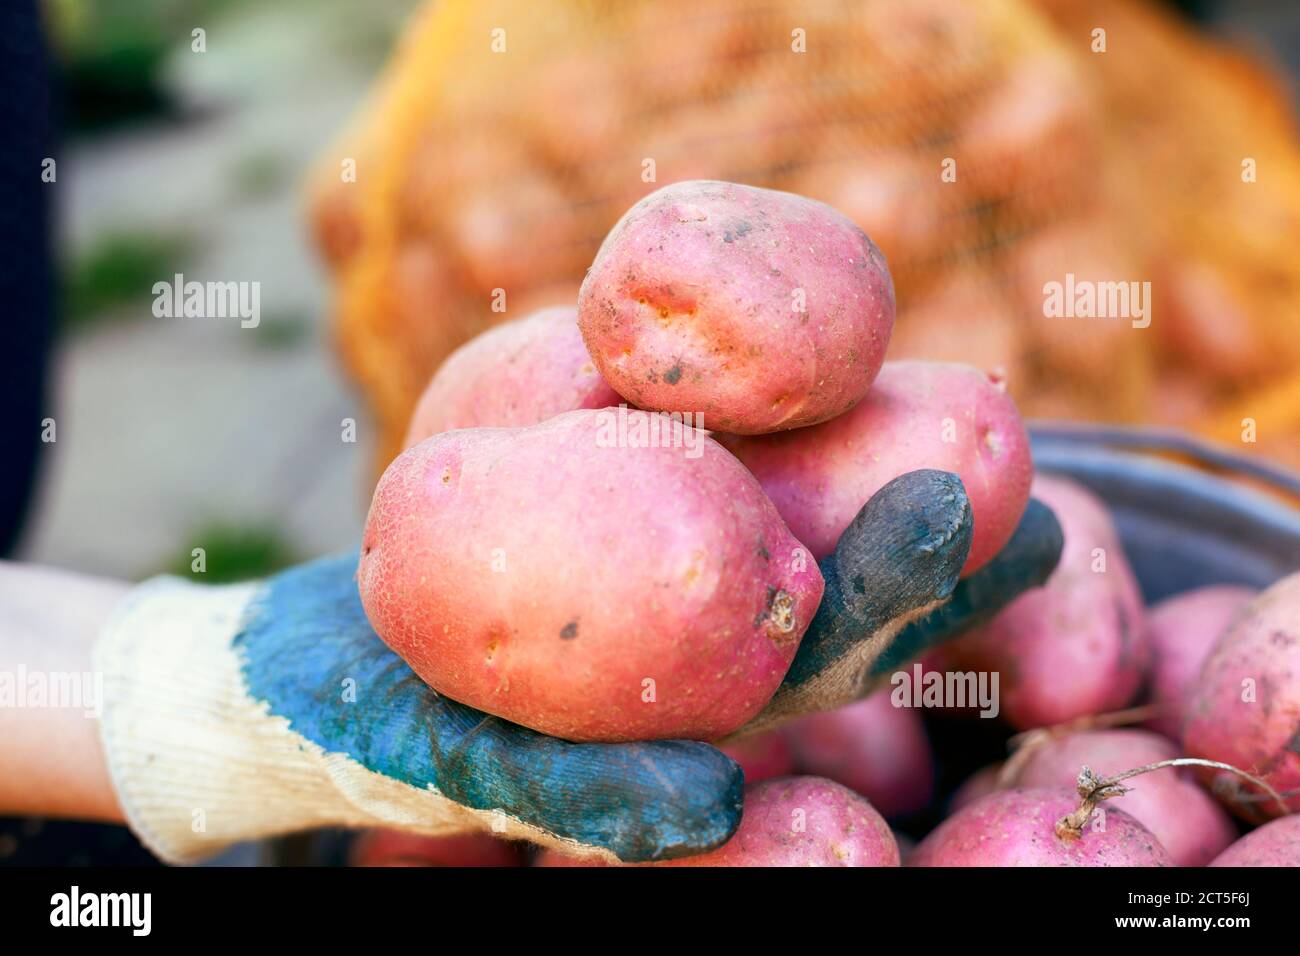 Woman hand in garden glove with potatoes. Close-up Stock Photo